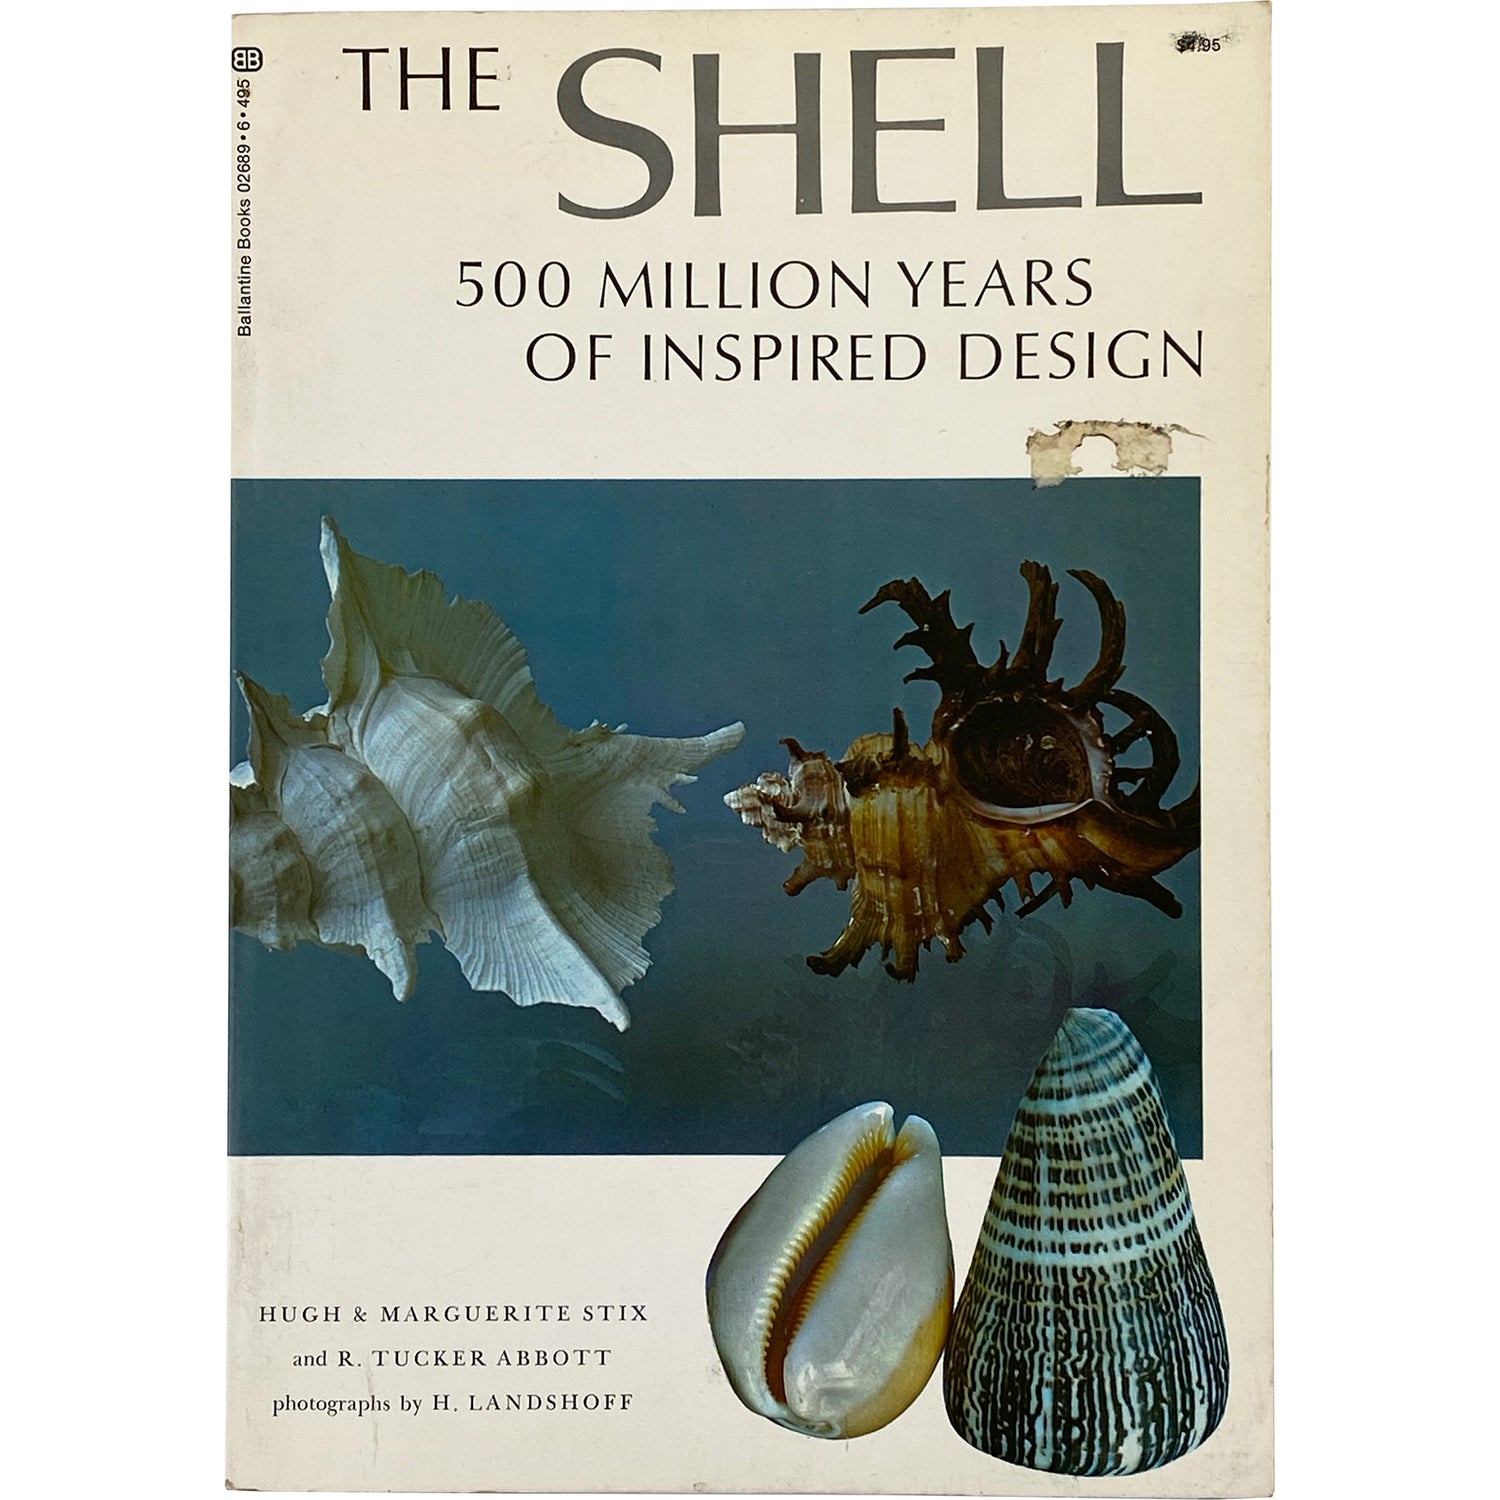 THE SHELL - 500 MILLION YEARS OF INSPIRED DESIGN BOOK